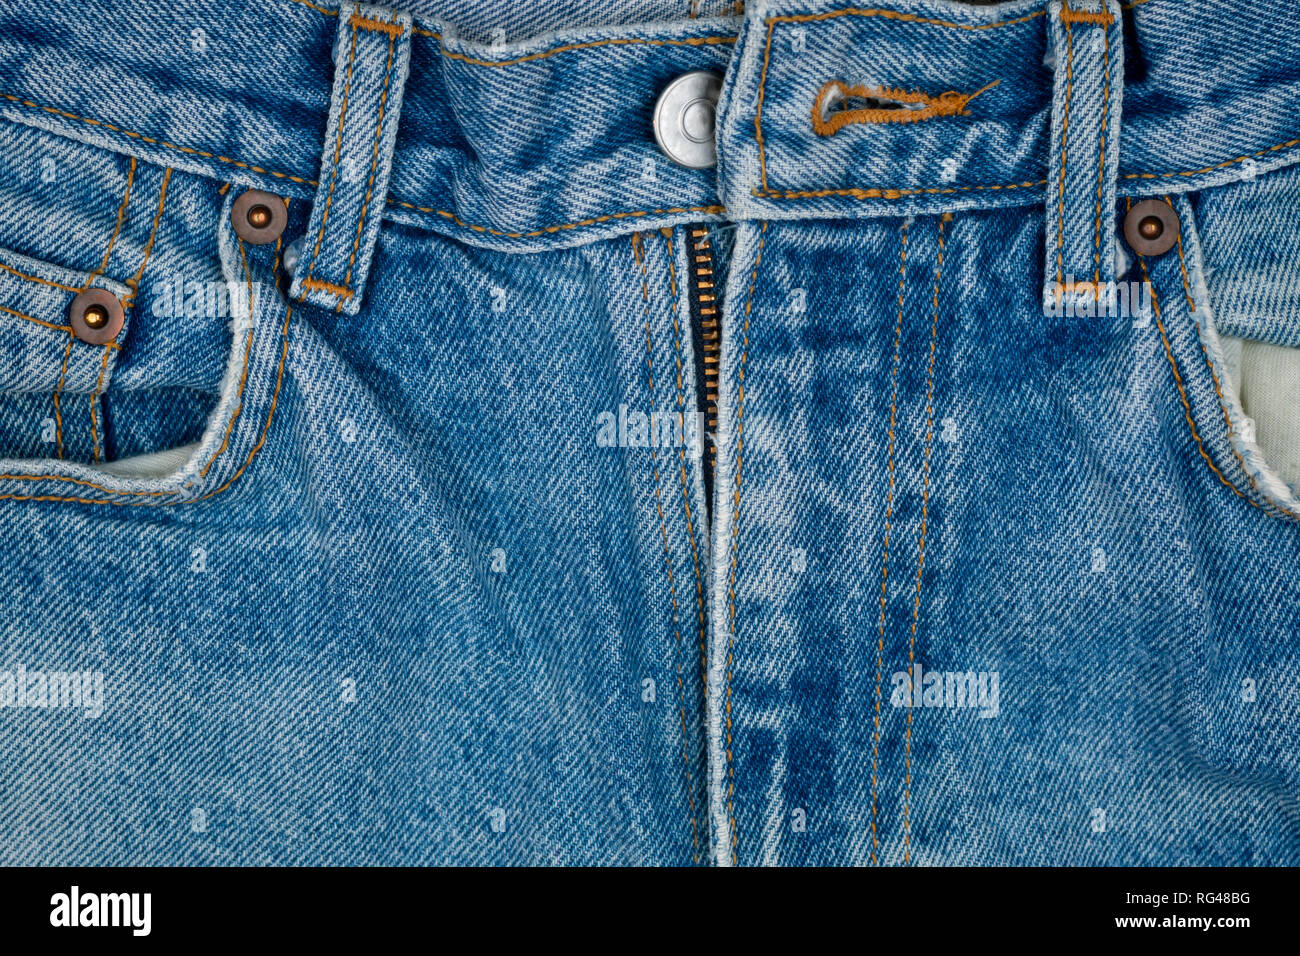 close-up details of worn pants jeans Stock Photo - Alamy